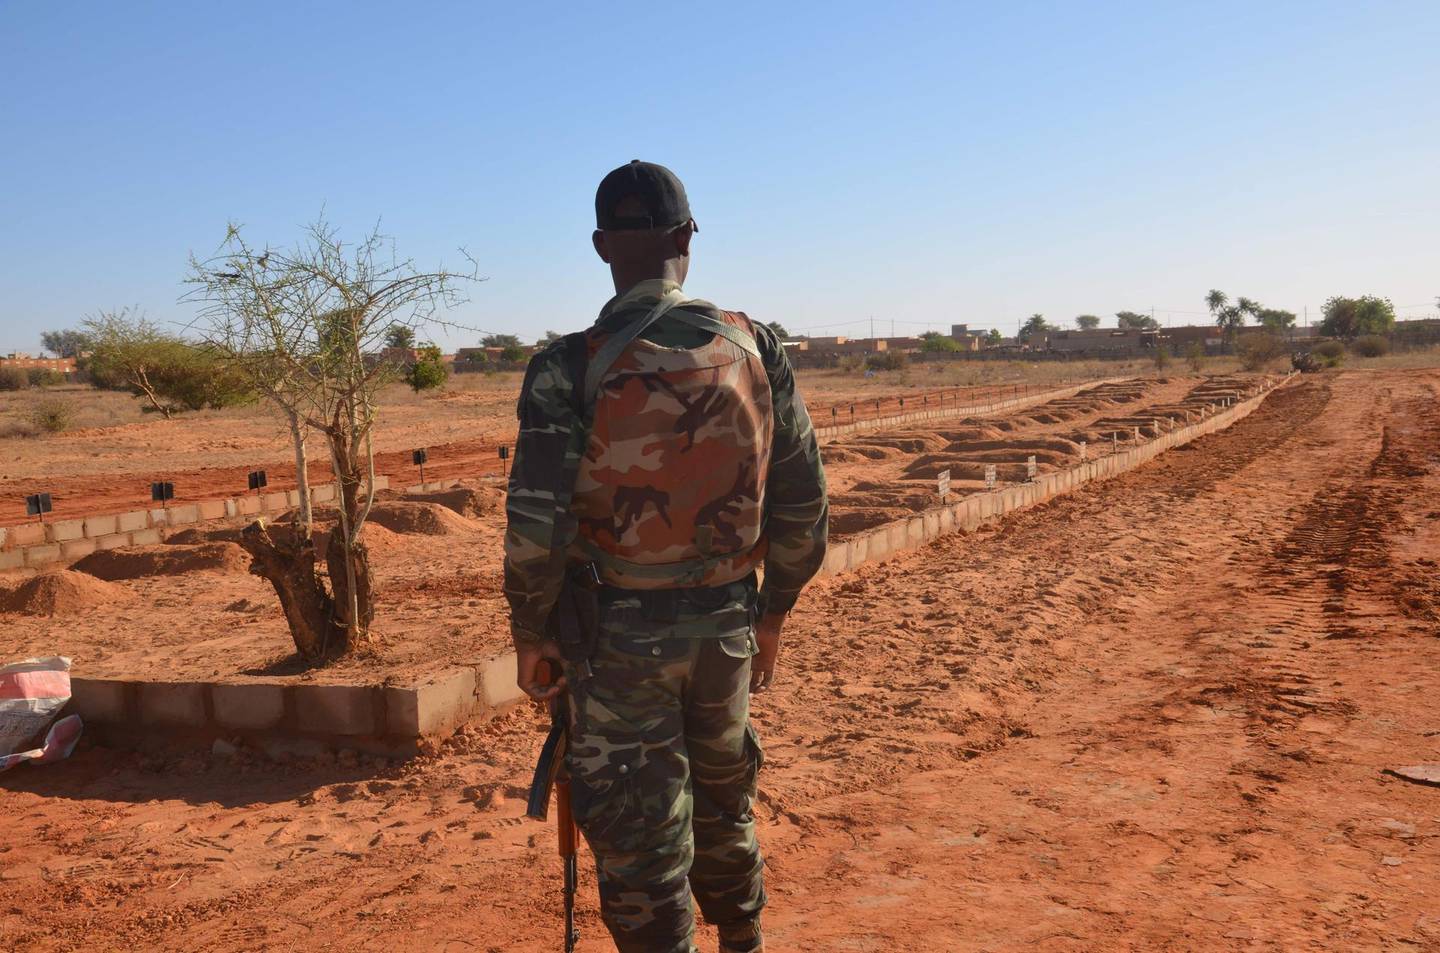 TOPSHOT - A Niger soldier looks at the graves of the soldiers killed before the arrival of the Leaders of the G5 Sahel nations in Niamey, on December 15, 2019. Leaders of the G5 Sahel nations paid homage at the graves of 71 Niger military personnel killed in a jihadist attack on December 10, 2019, ahead of a regional summit to coordinate a response to the growing unrest.
 / AFP / Boureima HAMA
